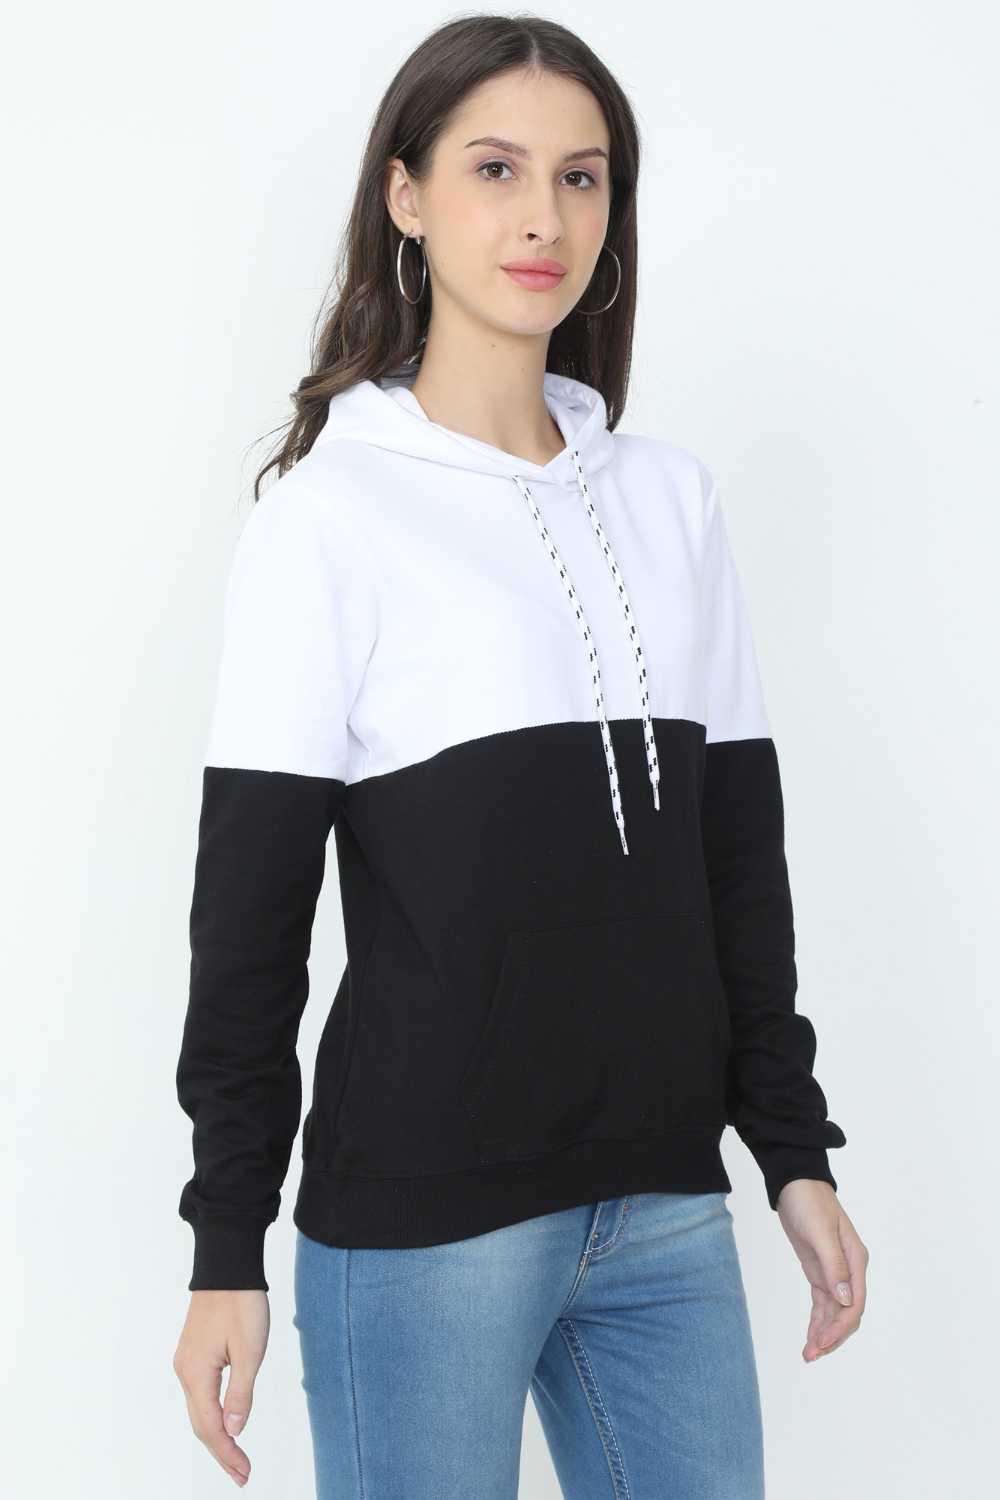 HOODIE for Women In Black and White | sandgrouse